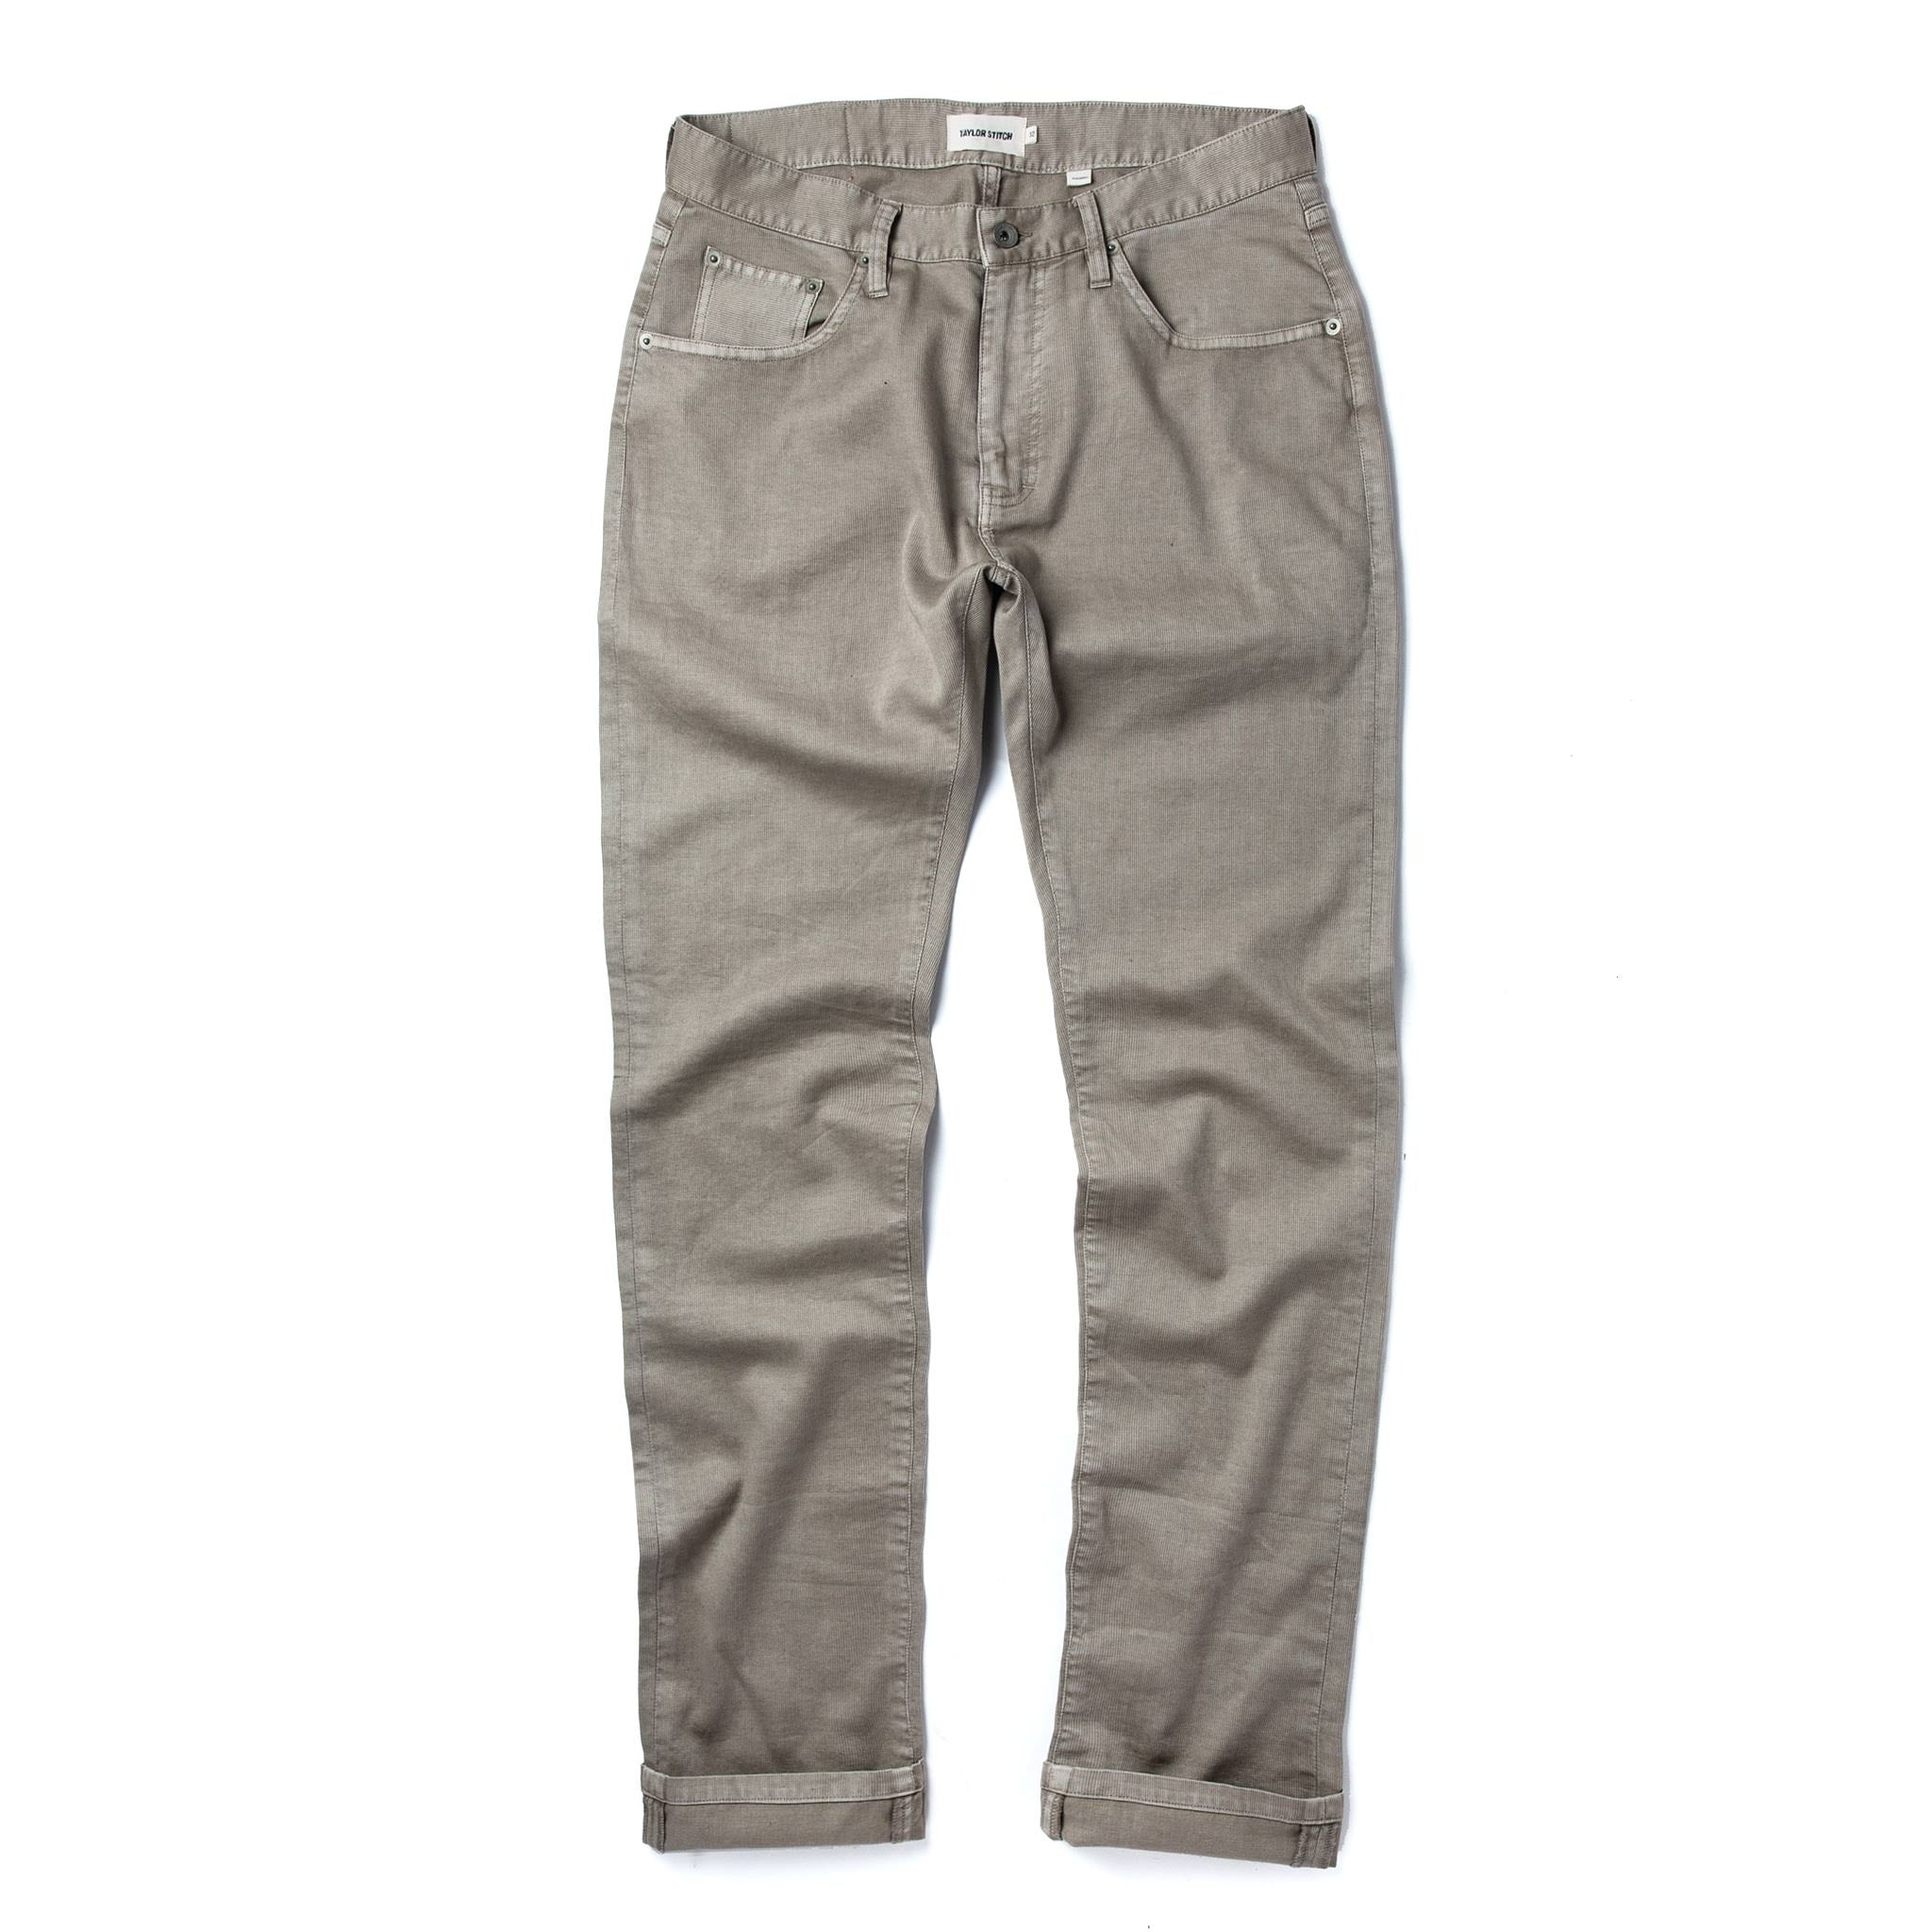 The Democratic All Day Pant in Aluminum Bedford Cord | TS…